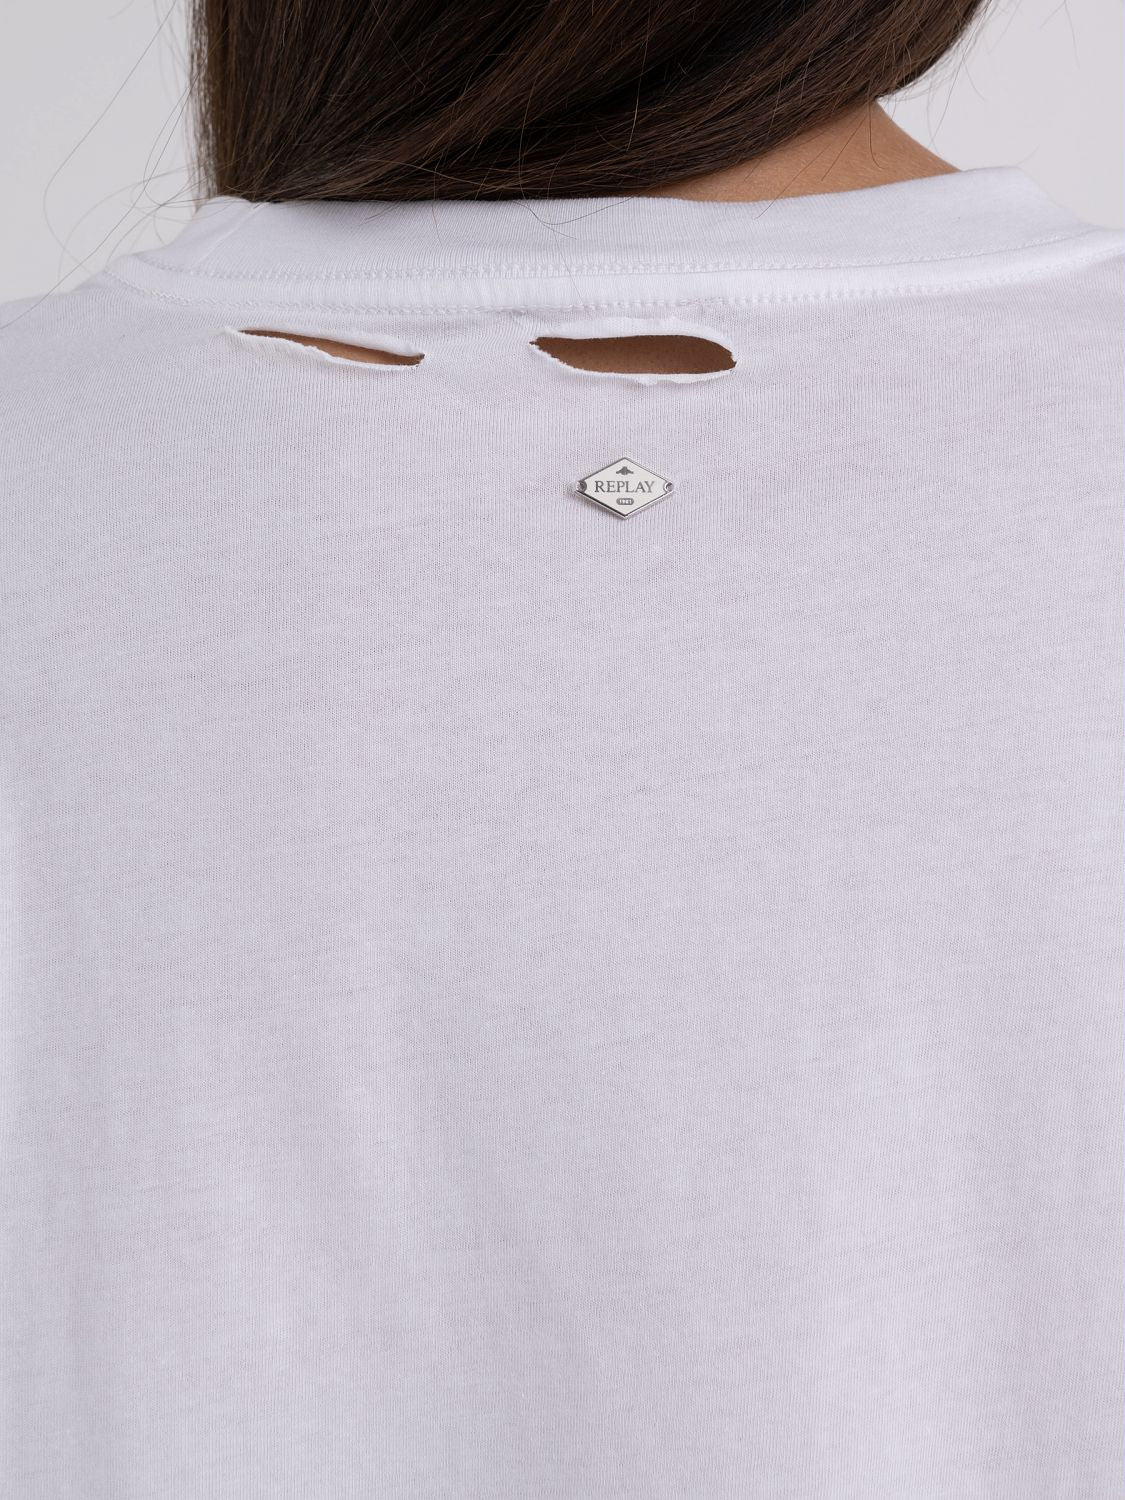 CROPPED T-SHIRT WITH ABRASIONS